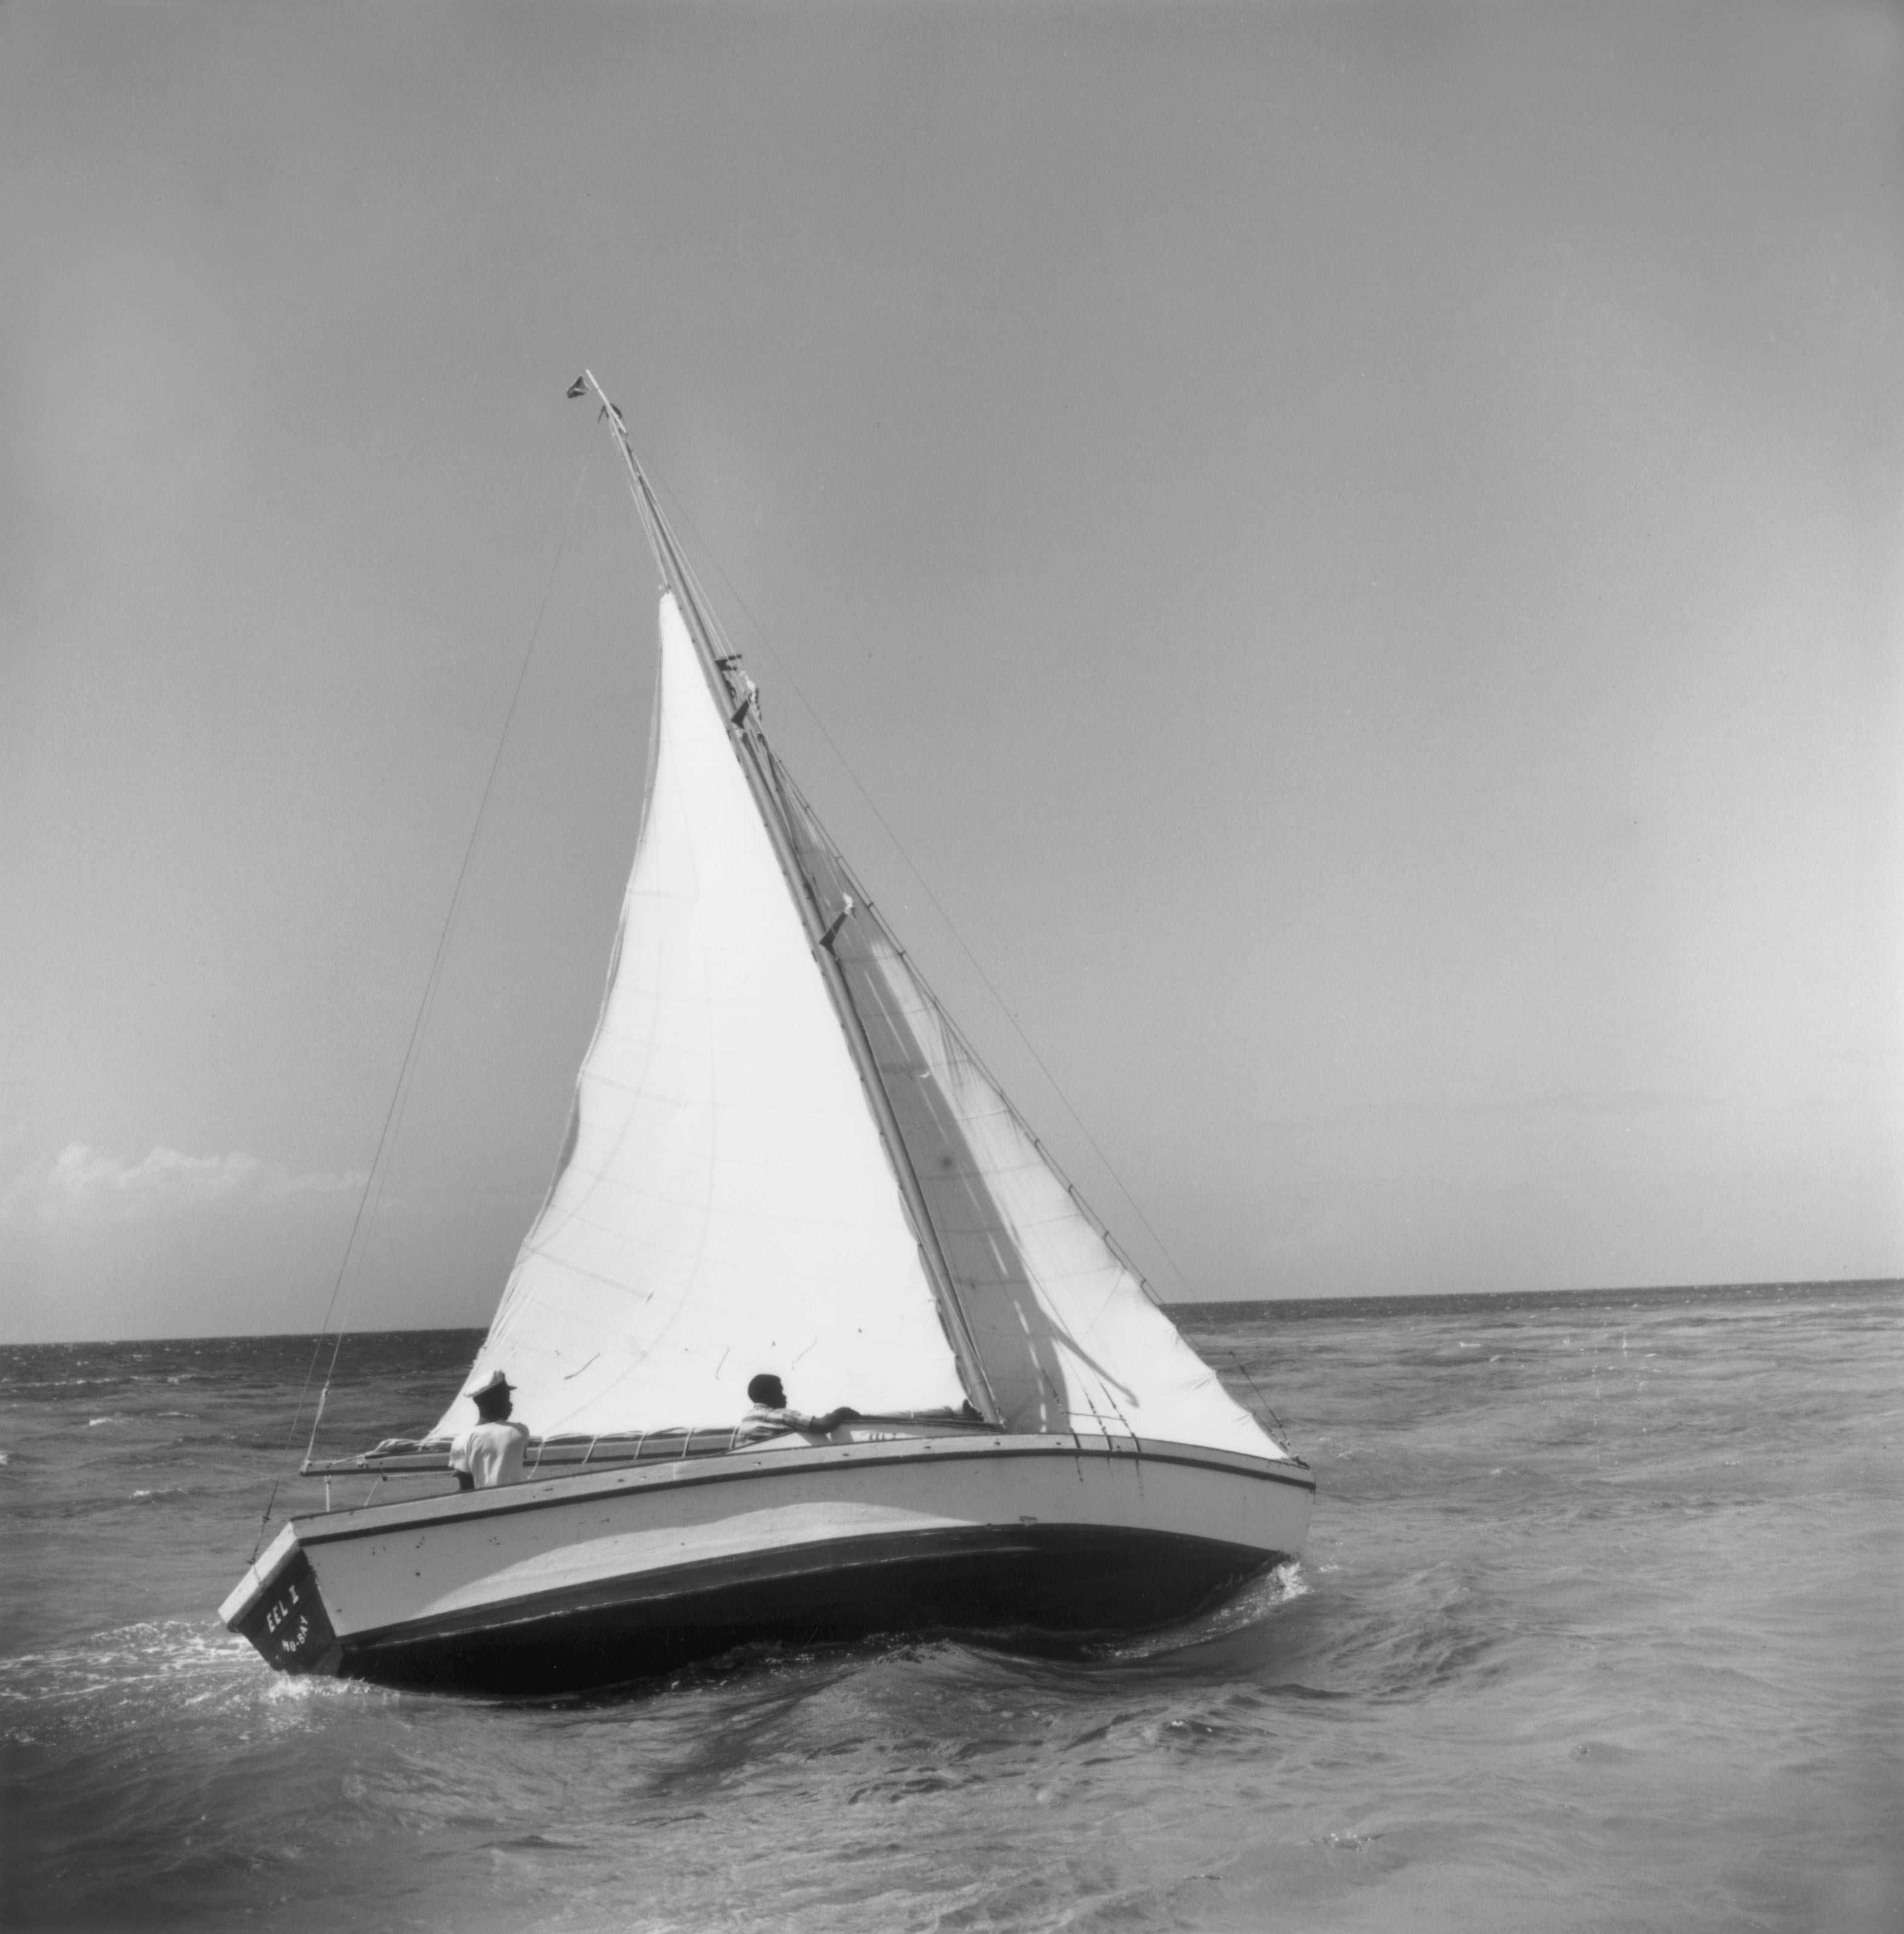 Jamaica Sea Sailing, 1953
Fiber print
Estate edition of 150
Signature stamped and hand numbered with Certificate of authenticity

1953: Two men sailing their yacht 'Eel II' in Jamaica.

Slim Aarons (1916-2006) worked mainly for society publications